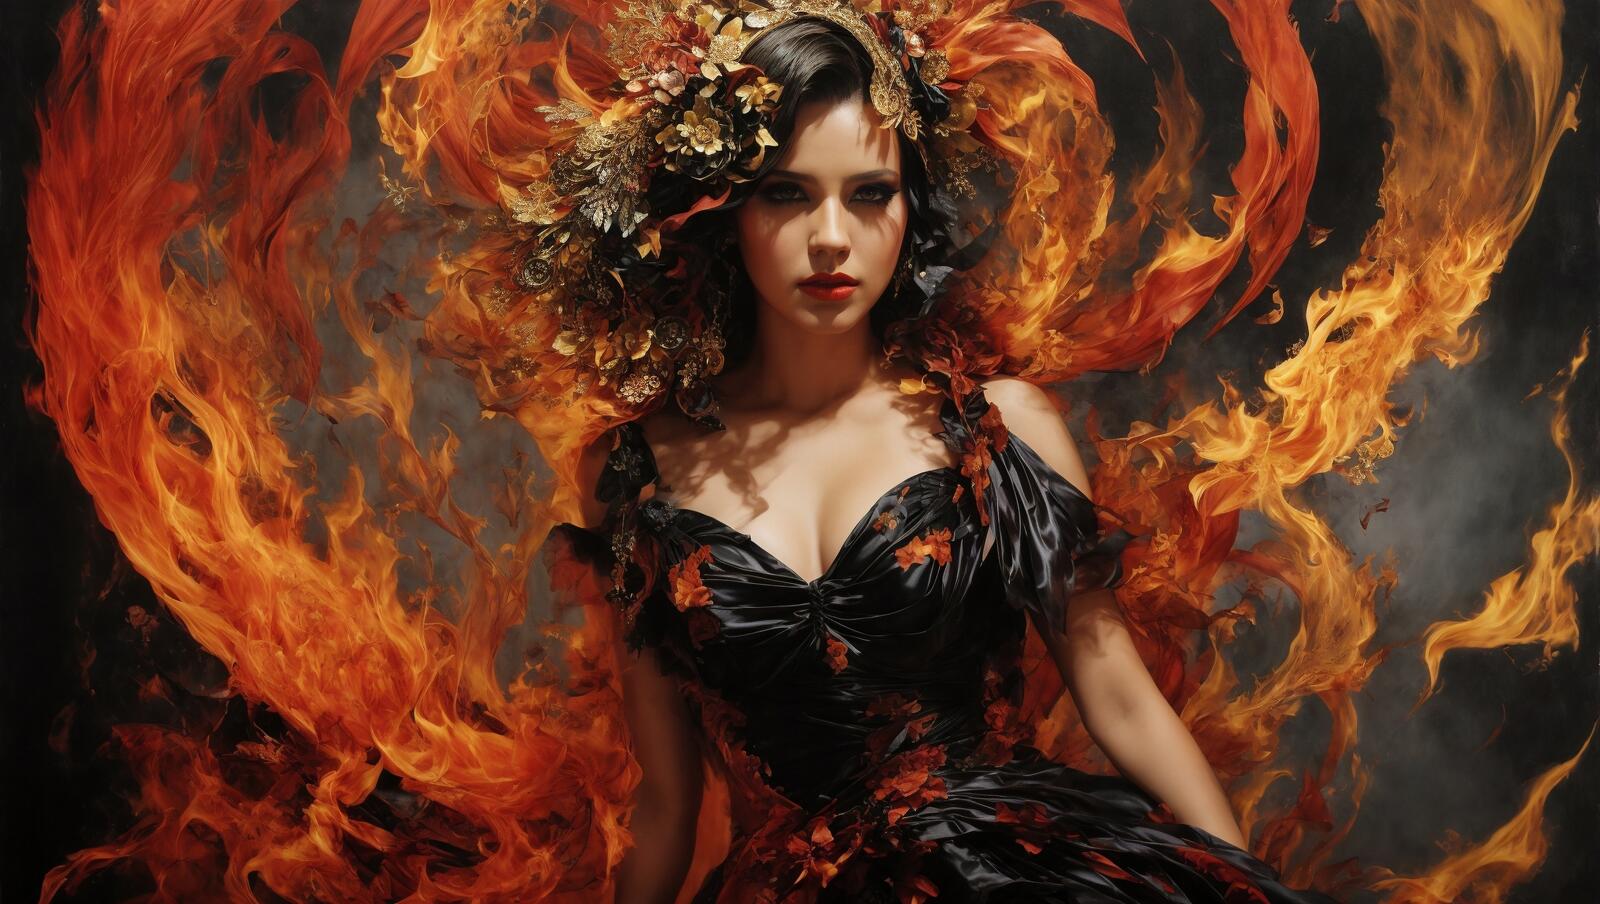 Free photo A woman wearing a black dress with a huge fire theme behind her.